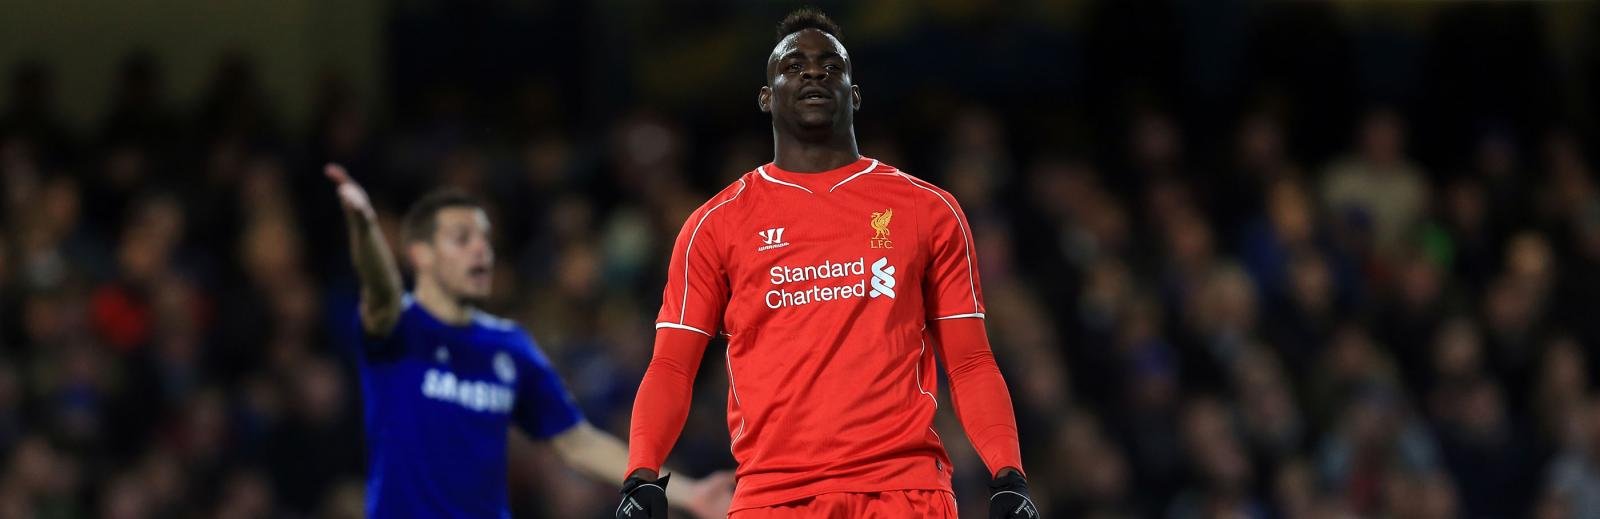 Balotelli: The Remarkable Story Behind The Headlines